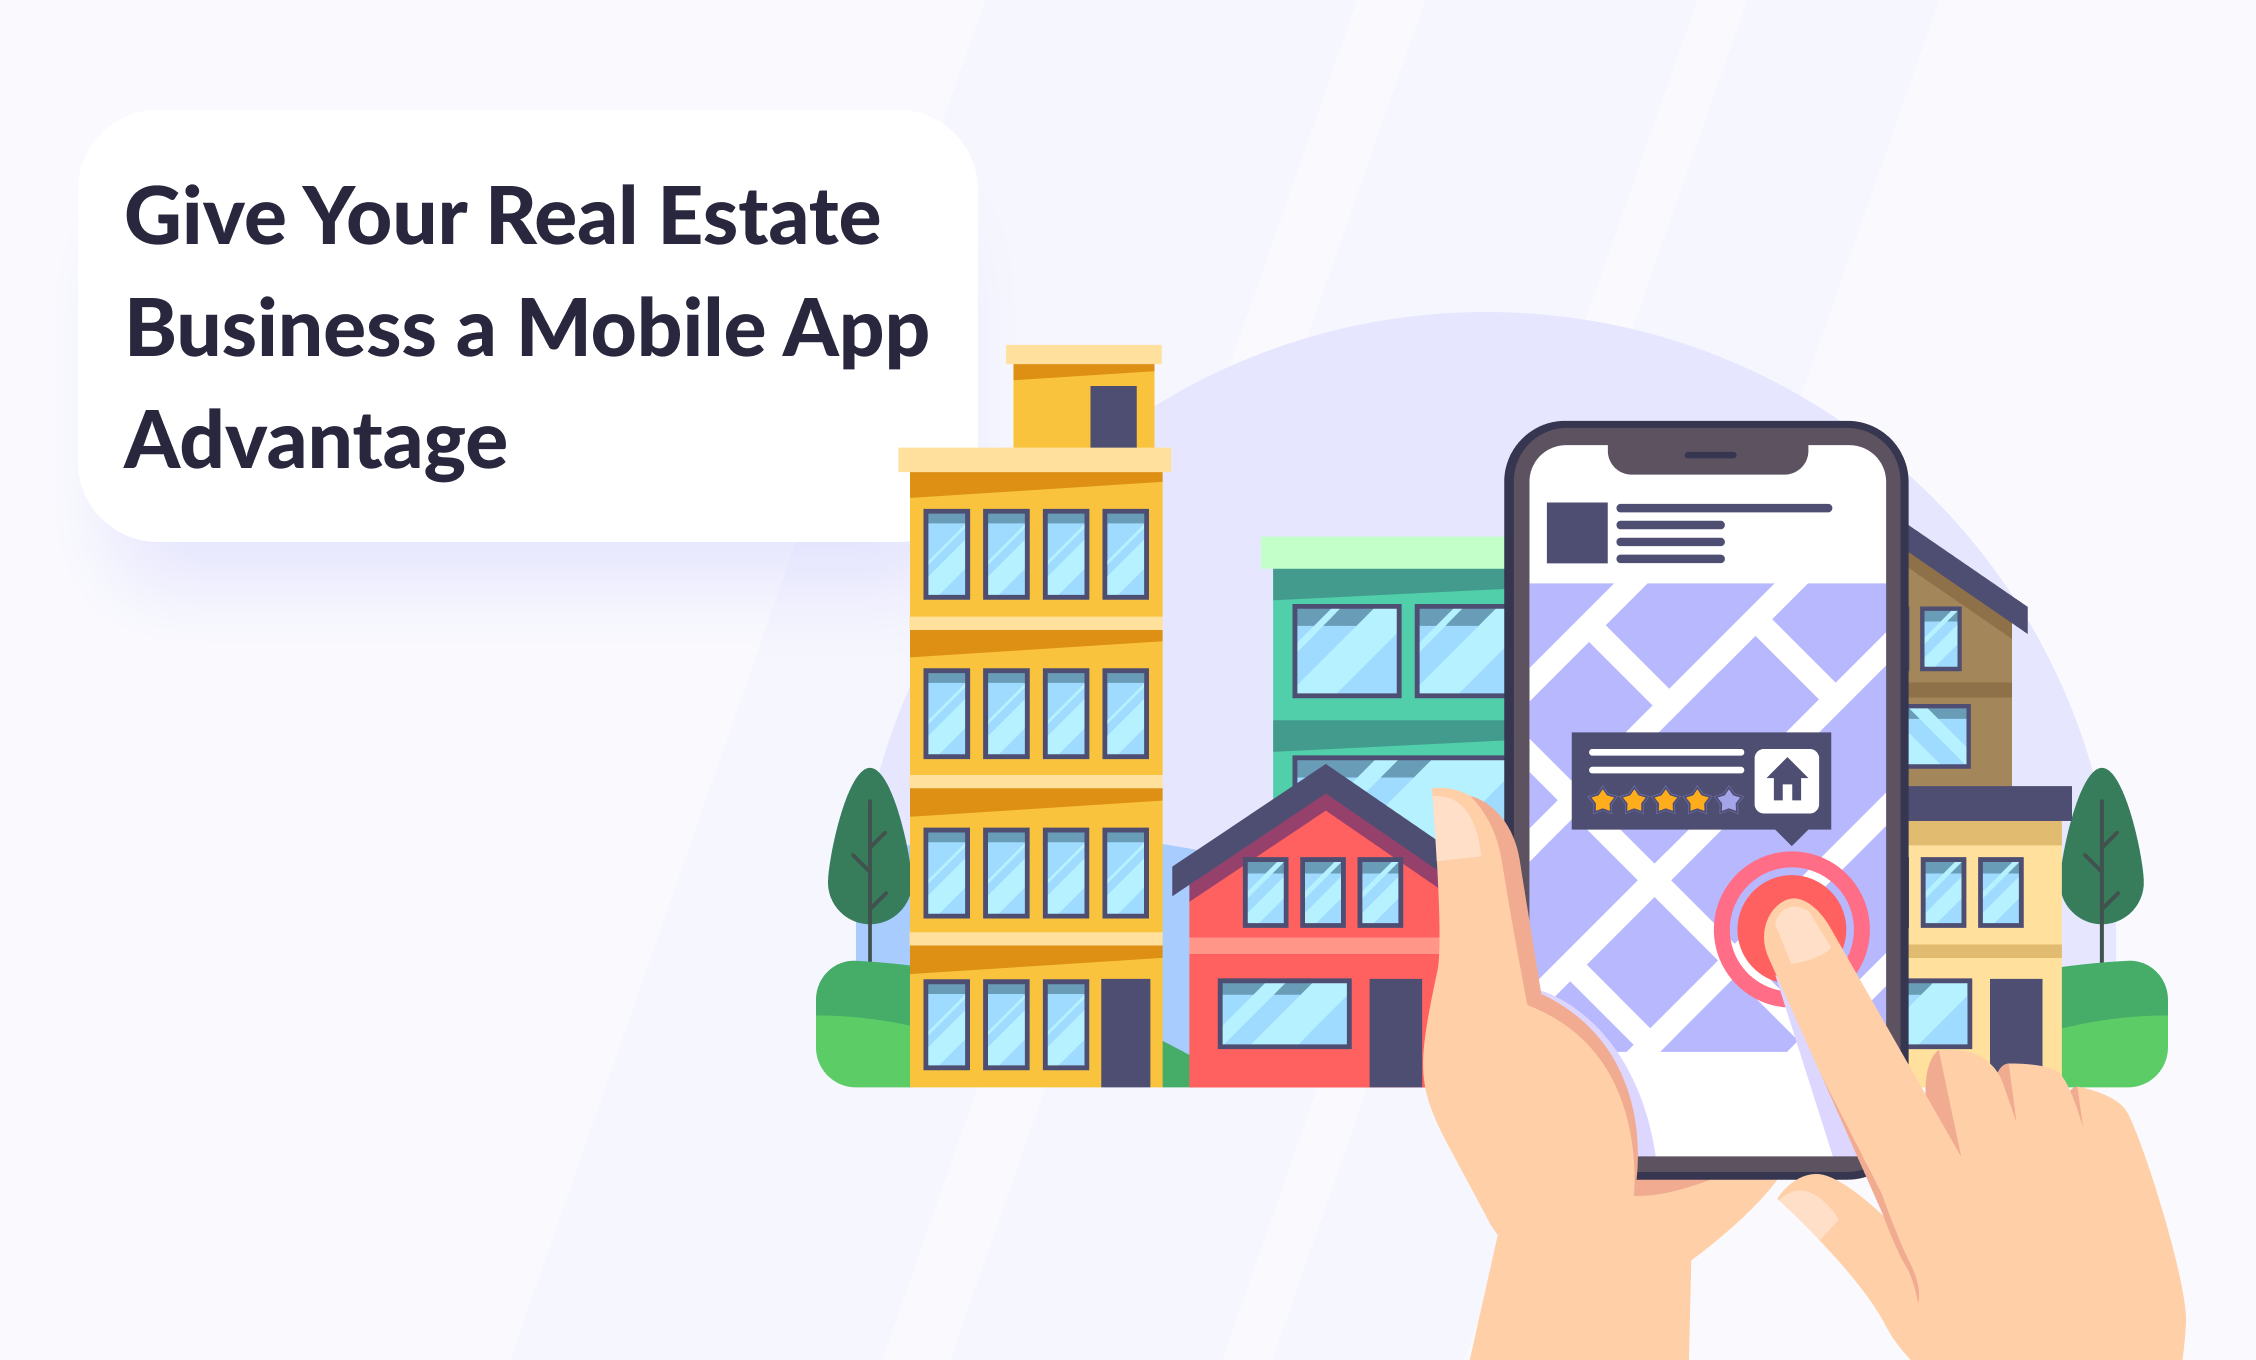 Reasons for real estate companies to have a mobile app